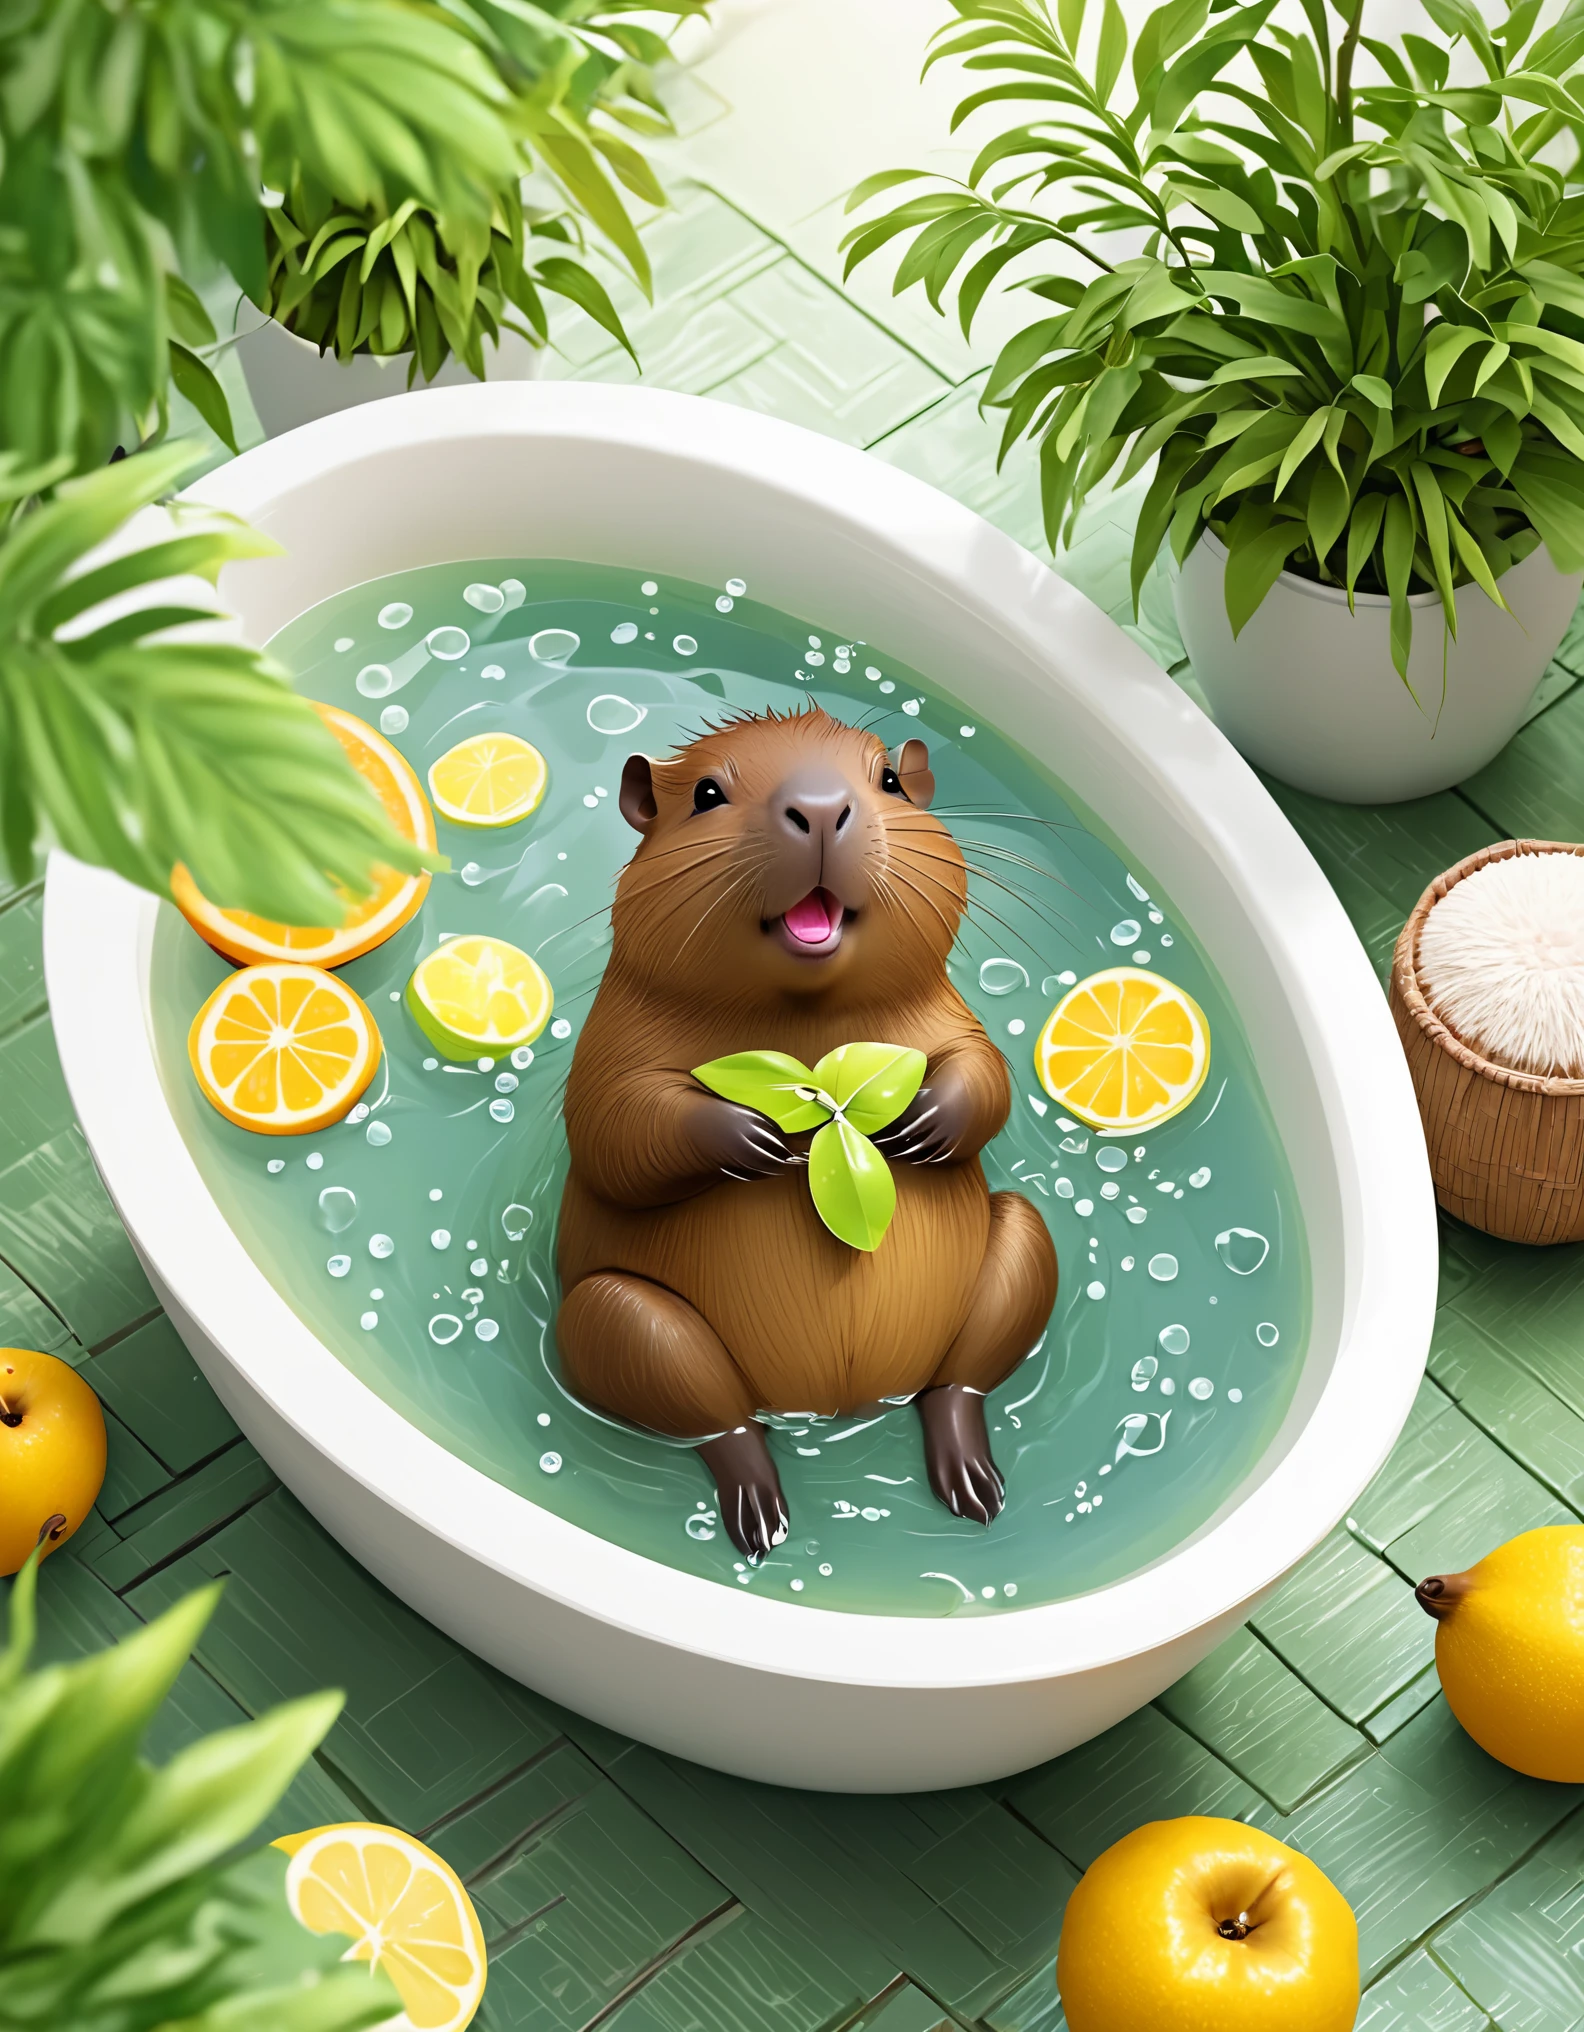 (masterpiece), (extremely intricate:1.3), A painting of a playful, adorable chibi capybara is enjoying a relaxing bath in a beautiful pond, surrounded by vibrant yuzu slices that float on the water's surface. The capybara's tiny, round body is covered in soft, fluffy fur, and it wears a small smile as it splashes around. The background of the scene is a serene, green forest with rays of sunlight filtering through the trees, casting a soft glow on the water.